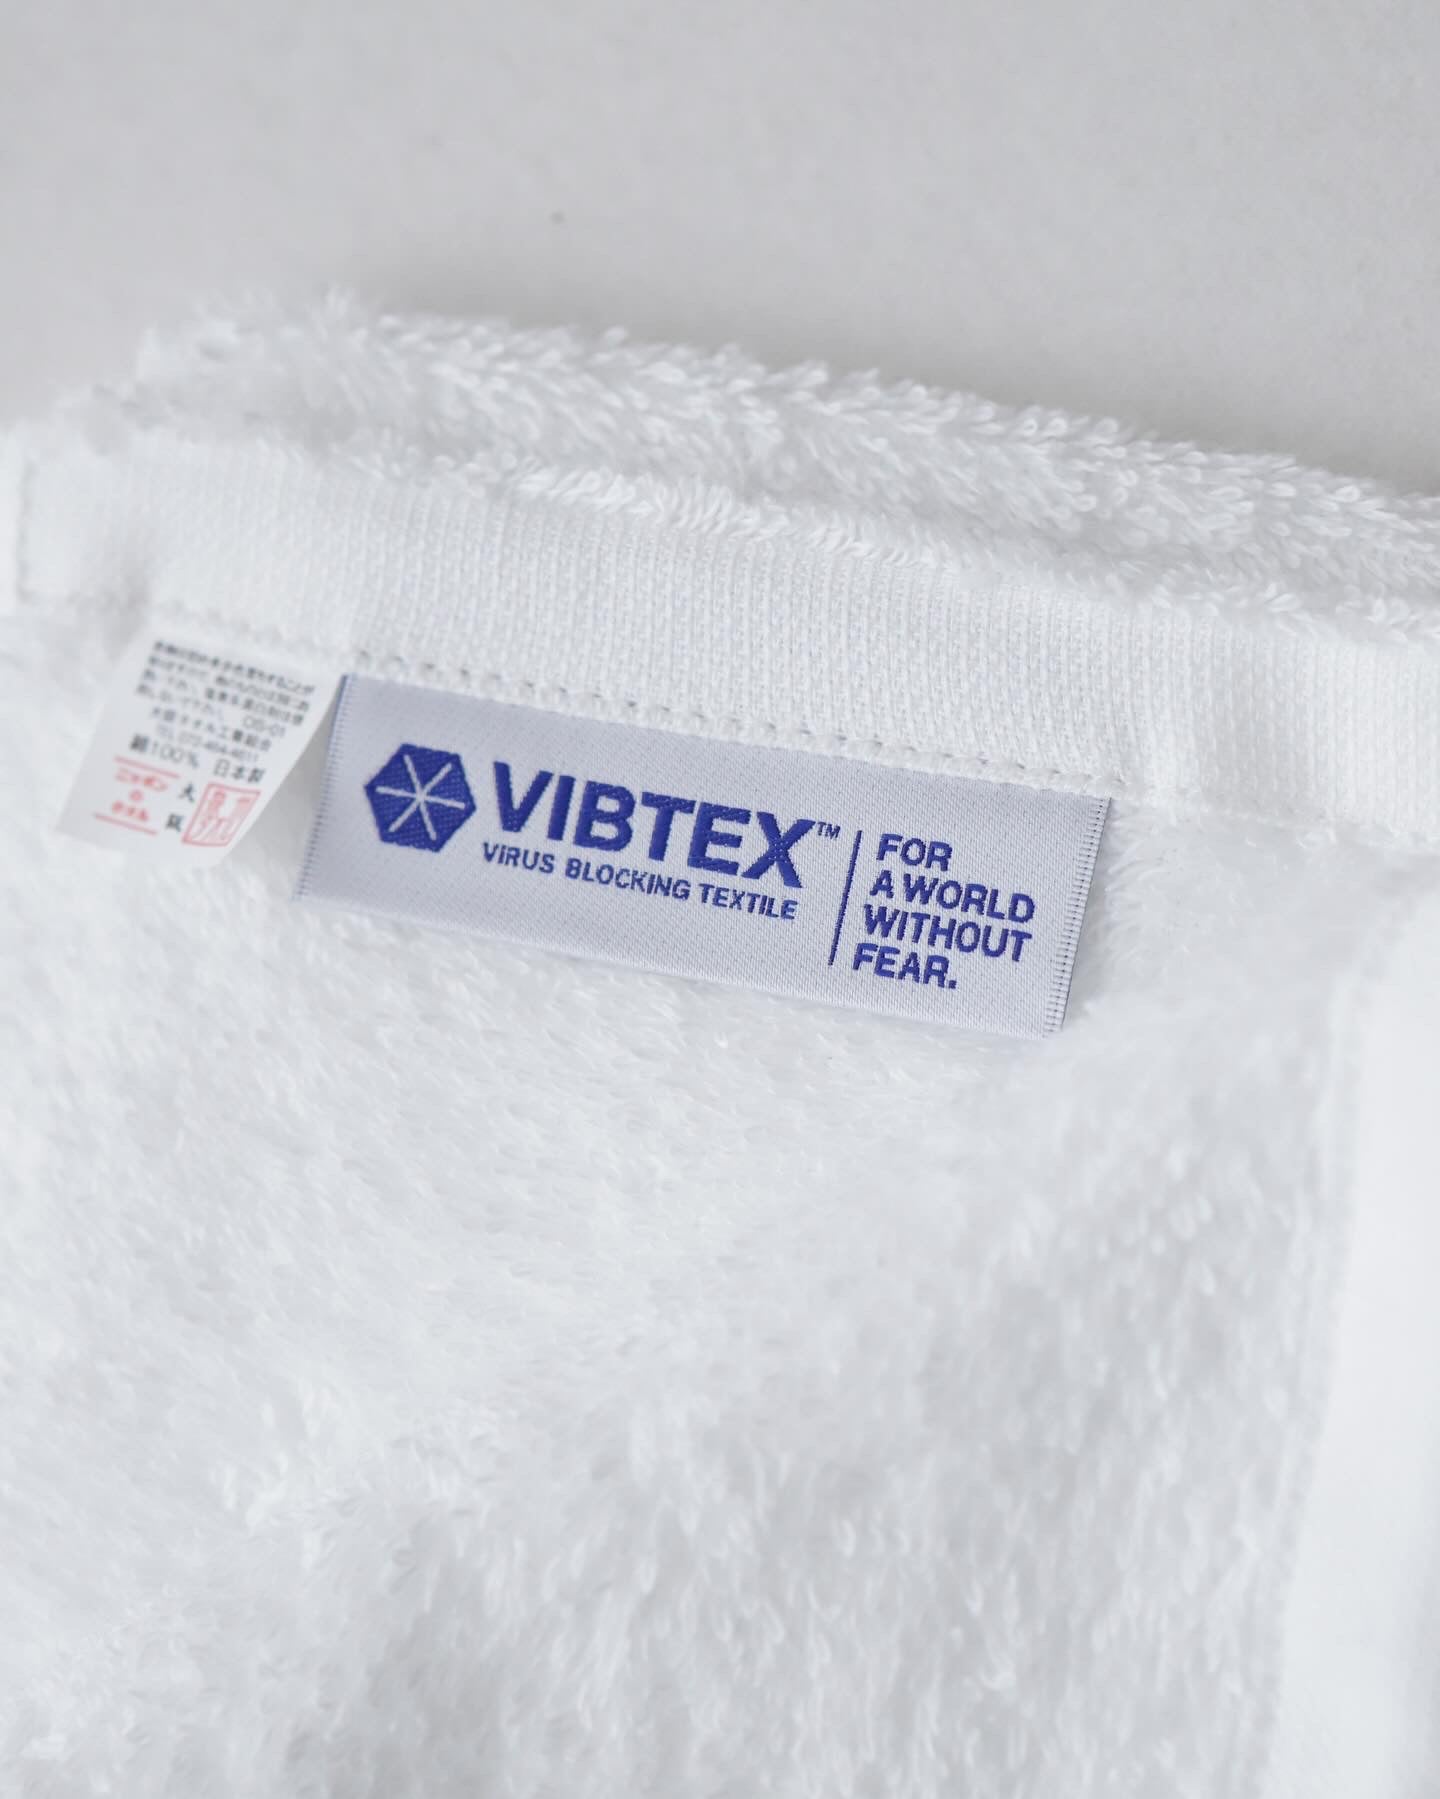 VIBTEX for ReFresh!Service FACE TOWEL